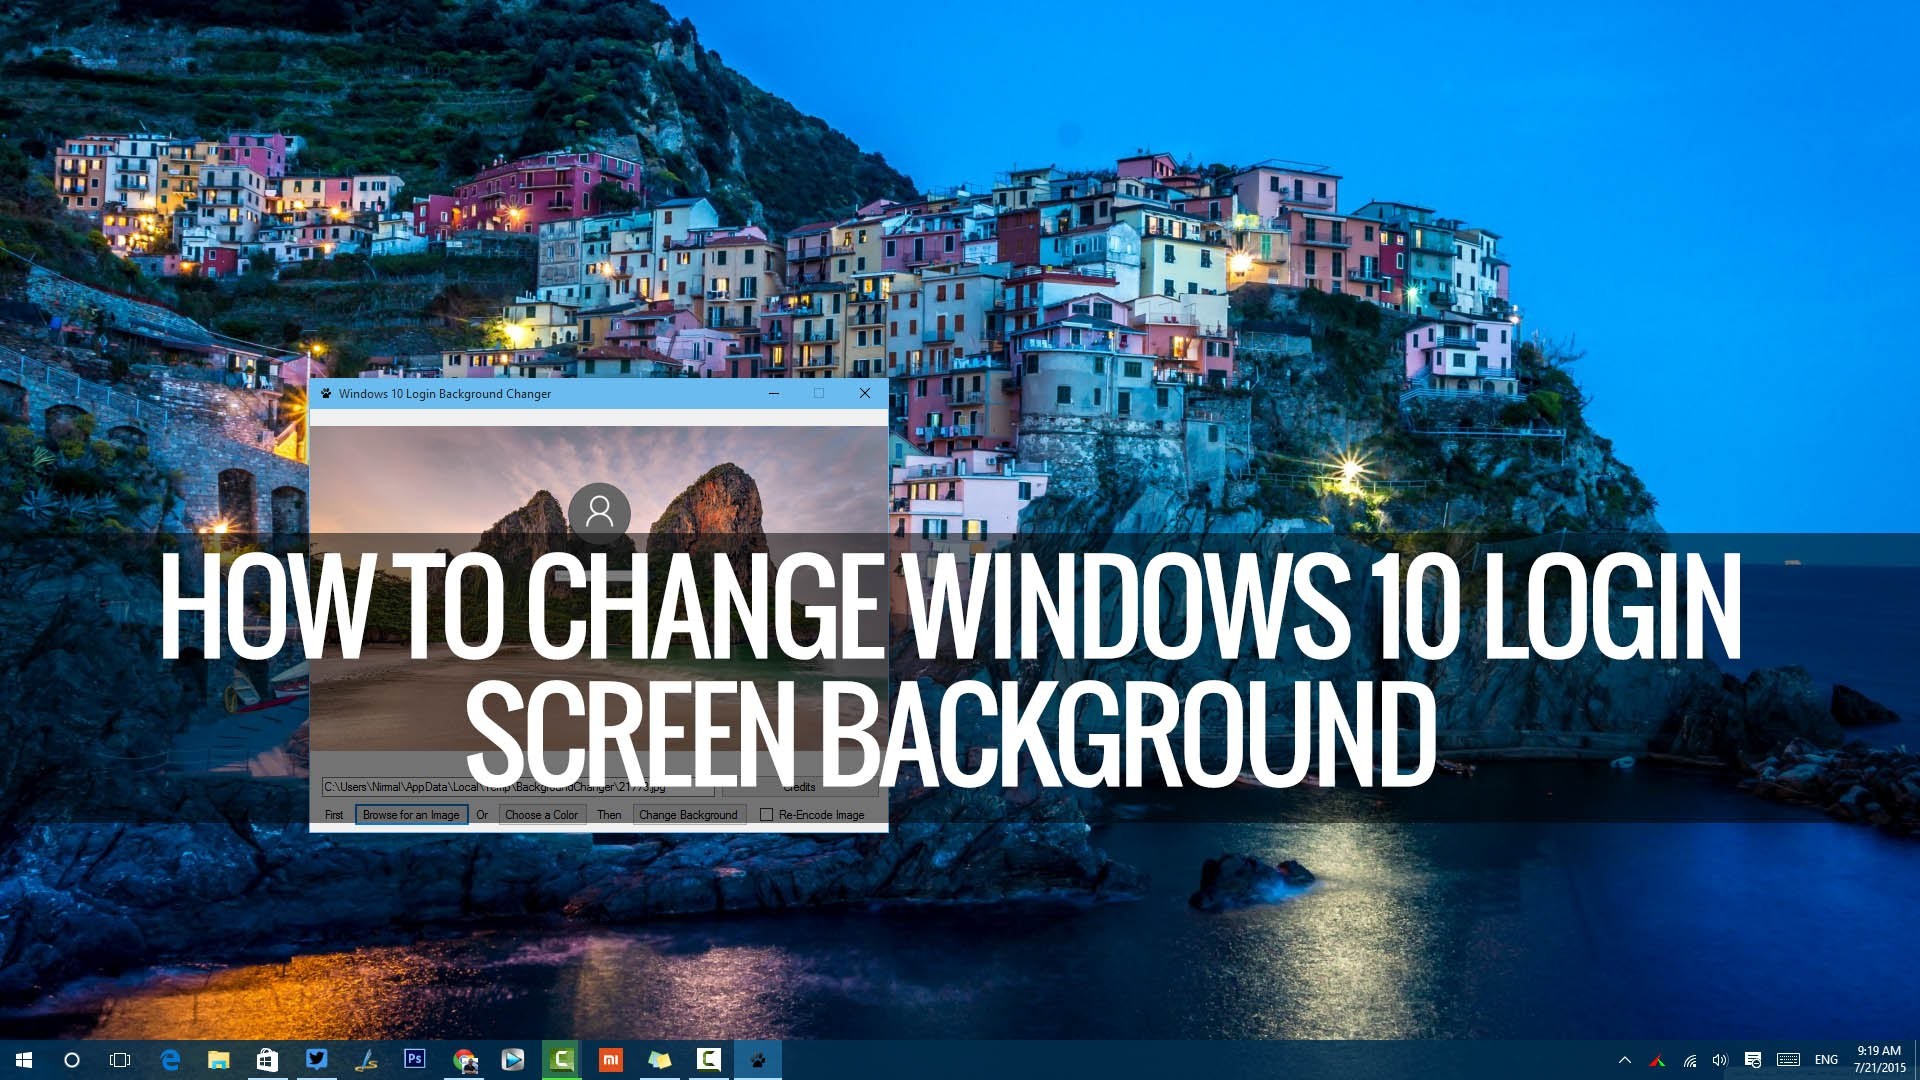 1920x1080 How to Change Windows 10 Login Screen Background | Techniqued - YouTube